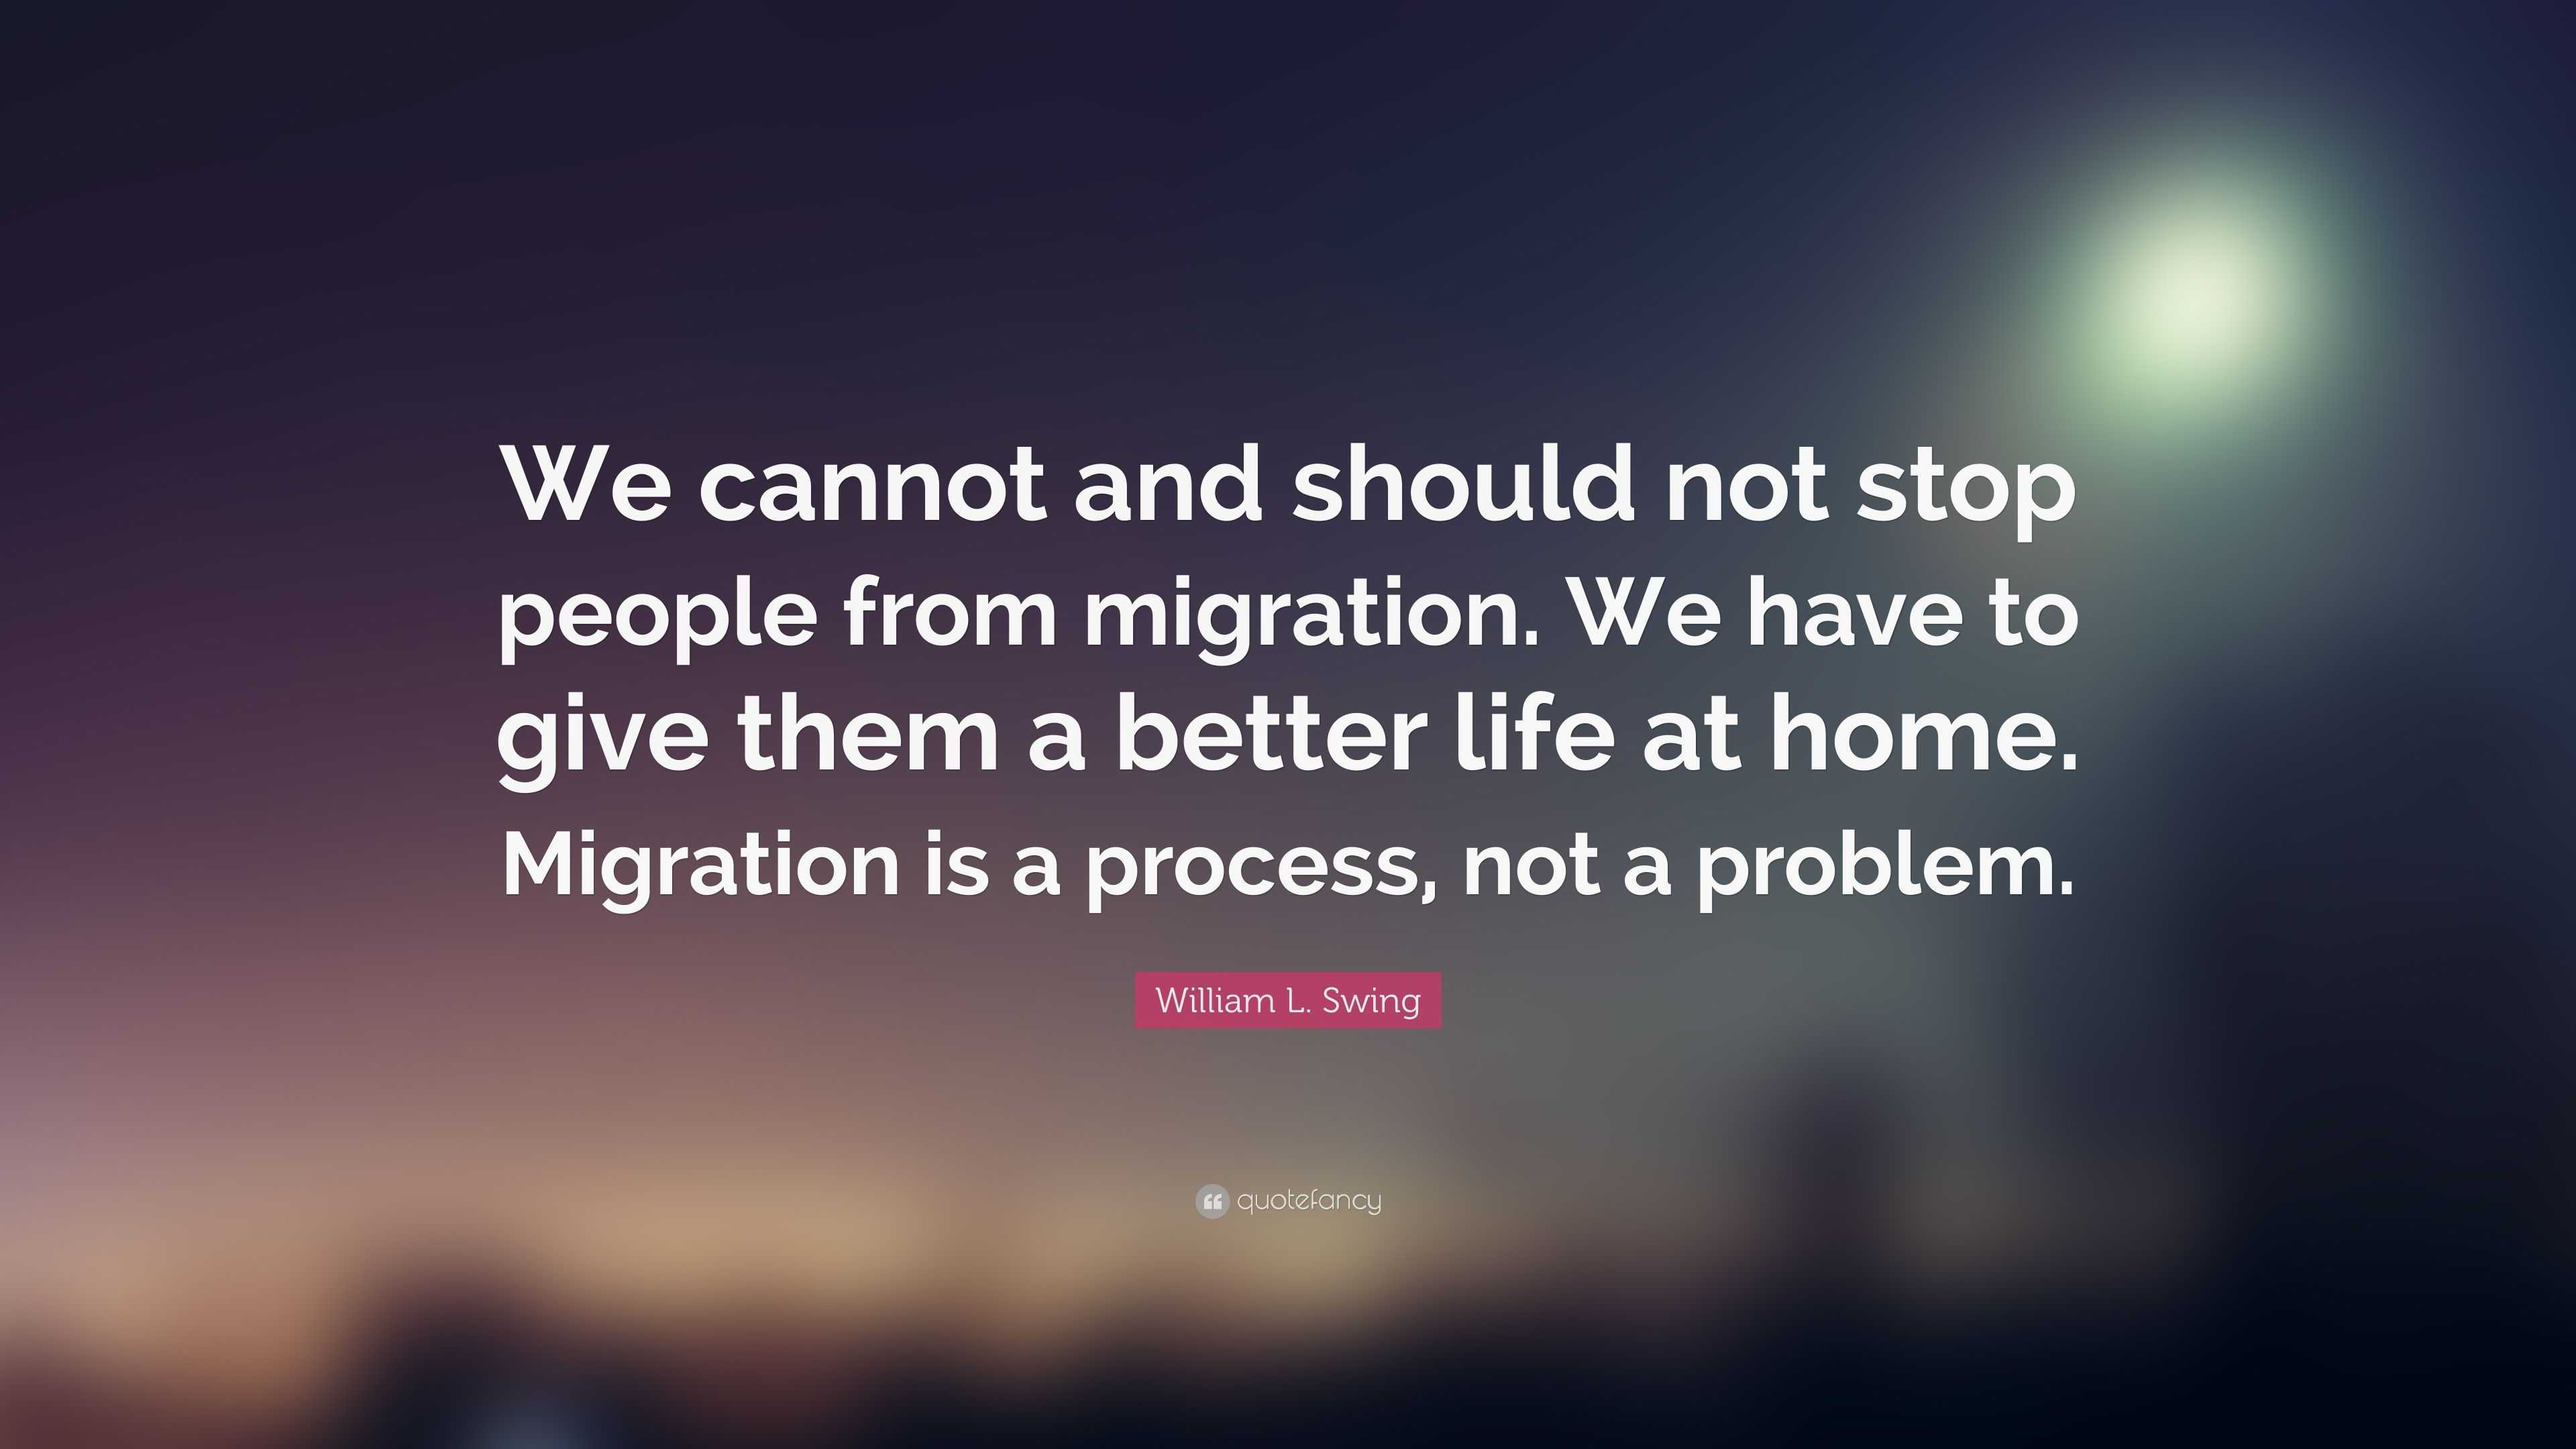 William L. Swing Quote: “We cannot and should not stop people from